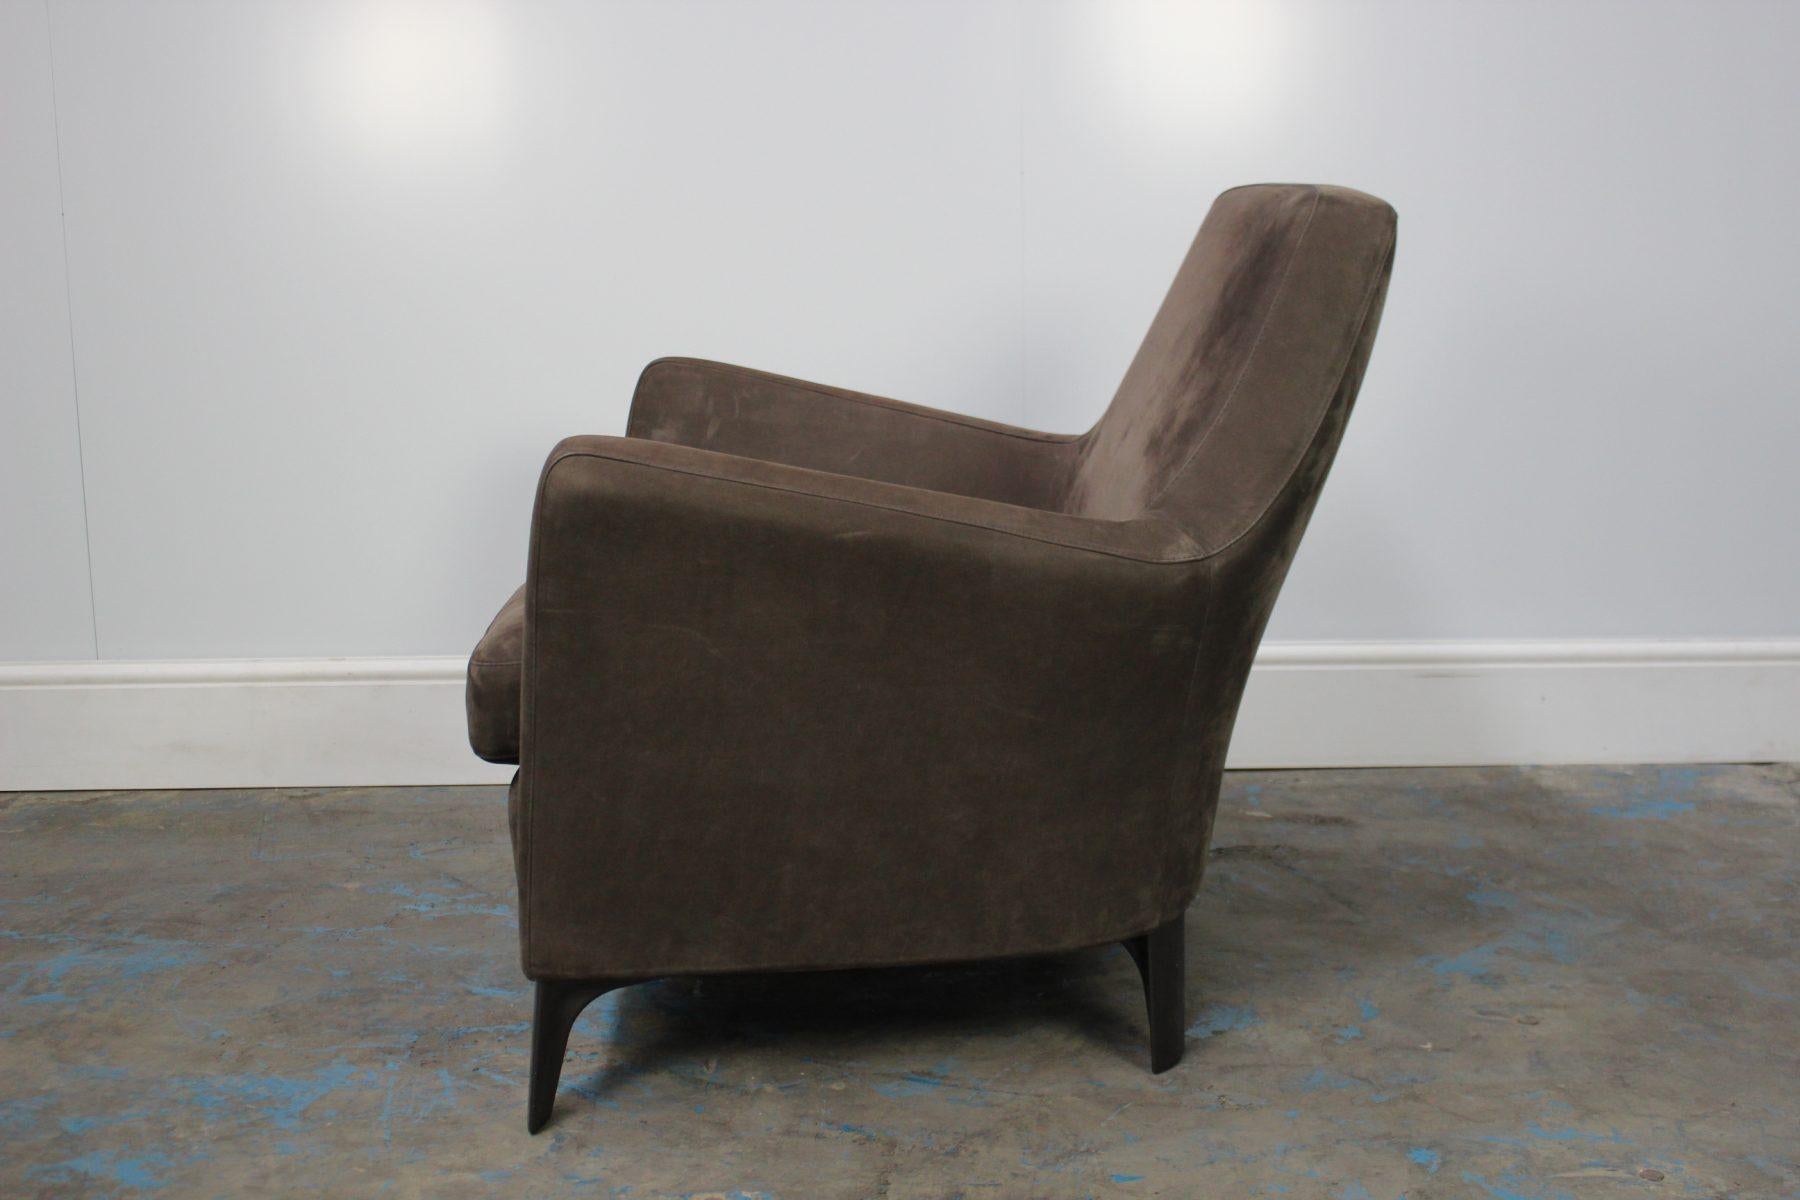 Peerless Pristine Minotti “Denny” Armchair in Suede Leather For Sale 1